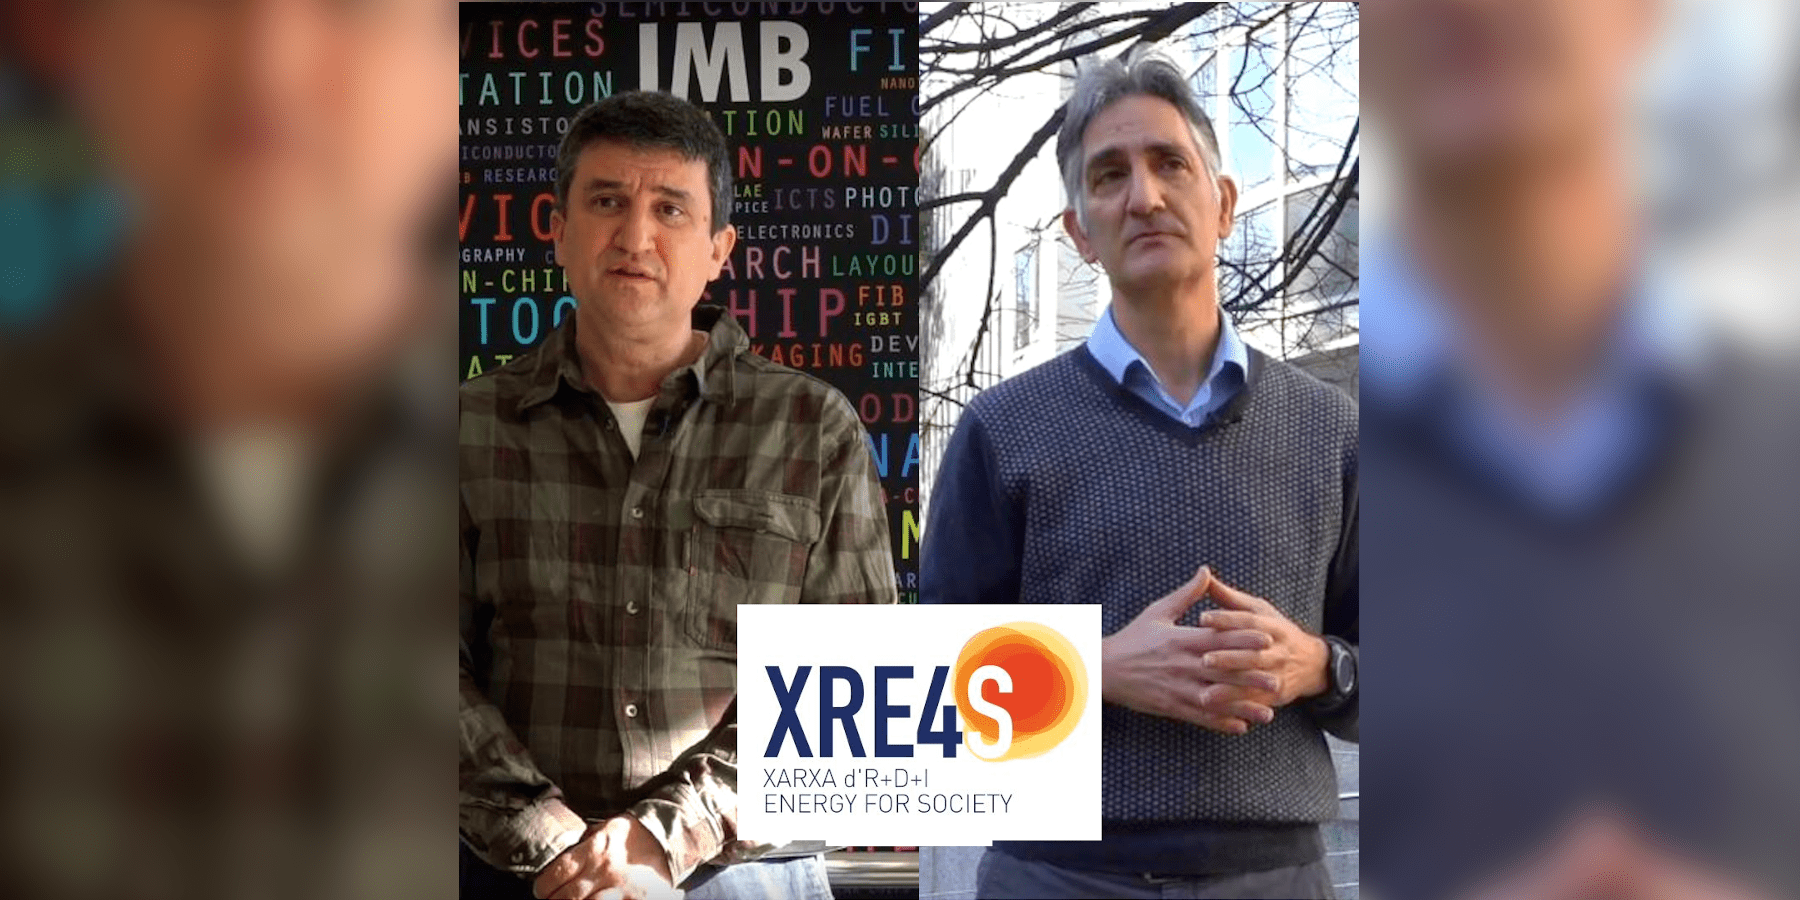 XRE4S Xavier Jordà and Luis Fonseca on their videos